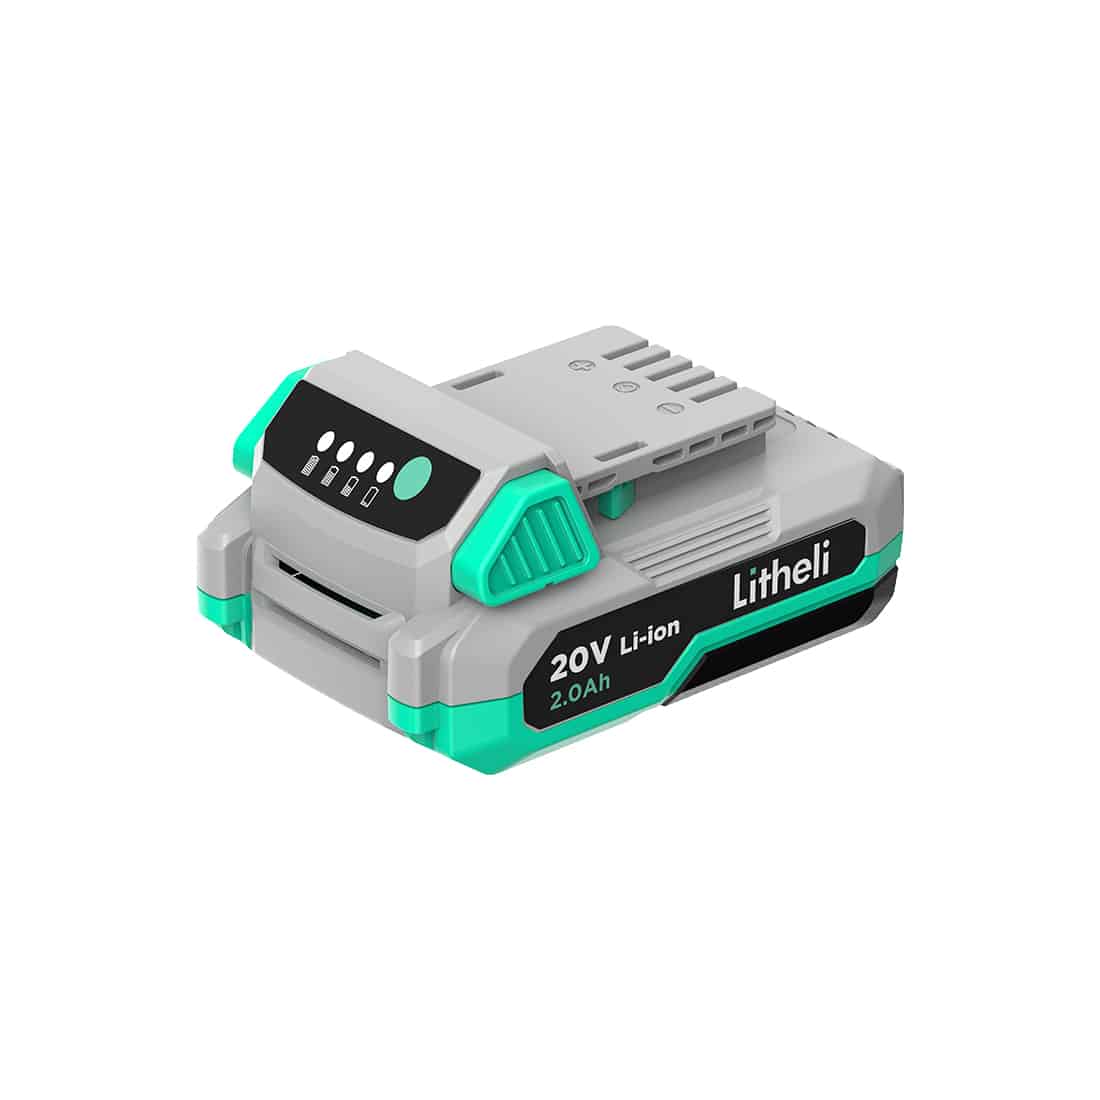 Litheli 20V 2.0Ah Lithium Ion Battery Pack